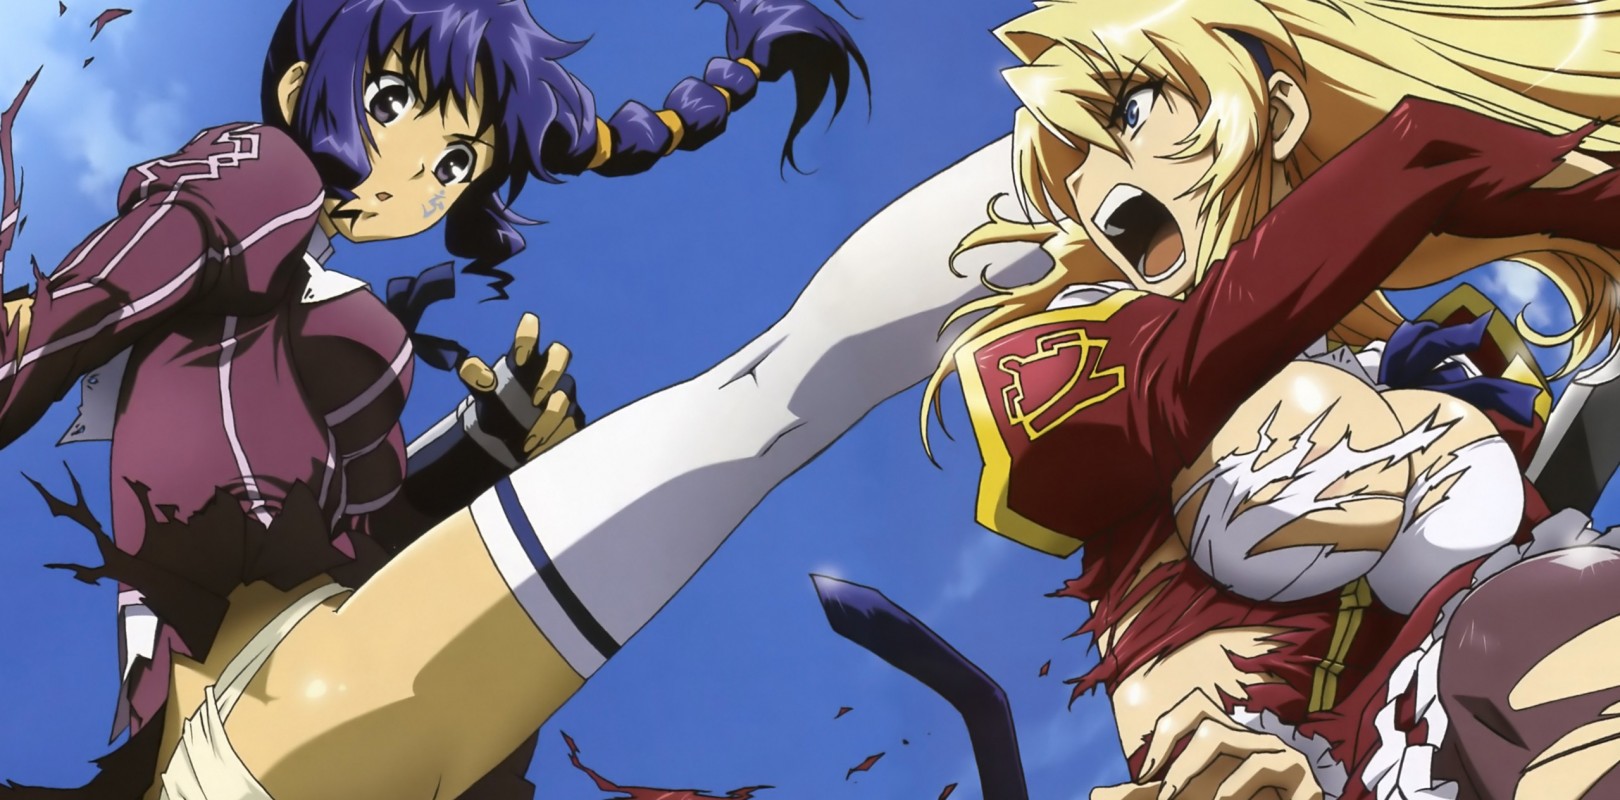 30 Awesome Anime Like Highschool DxD to Check Out in 2022